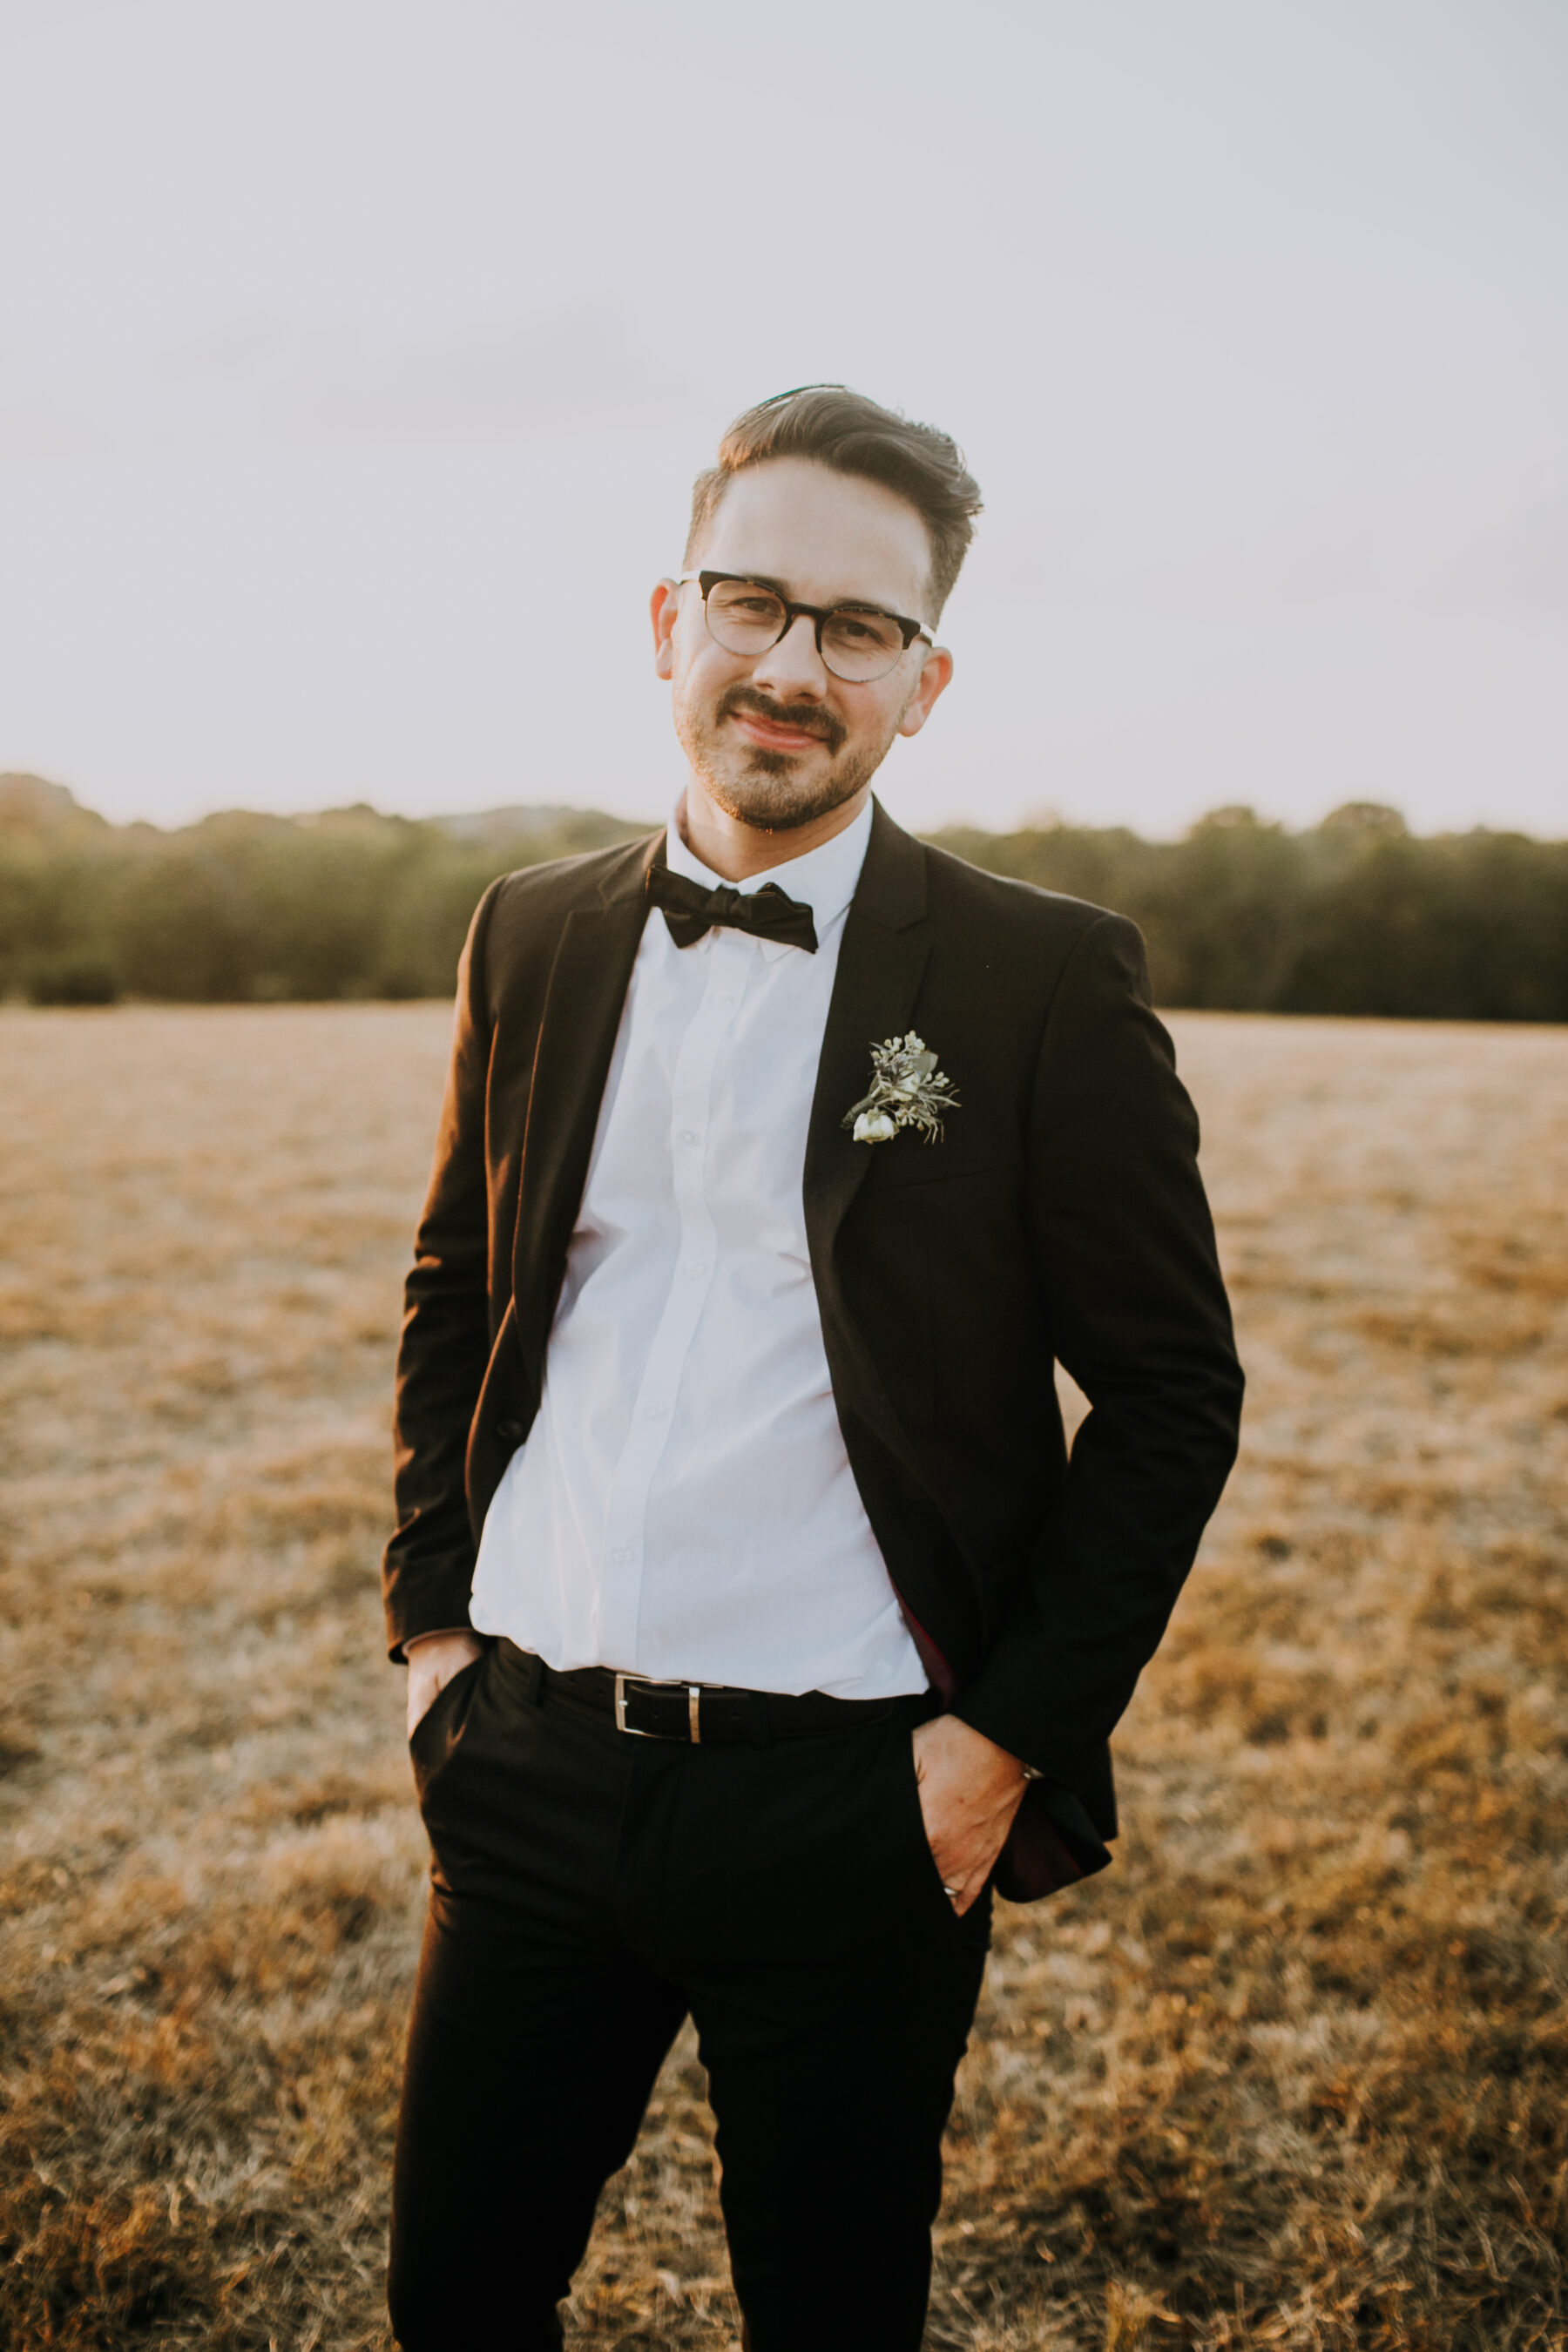 Grooms portrait: Nashville Wedding with Beautiful Views by Teale Photography featured on Nashville Bride Guide